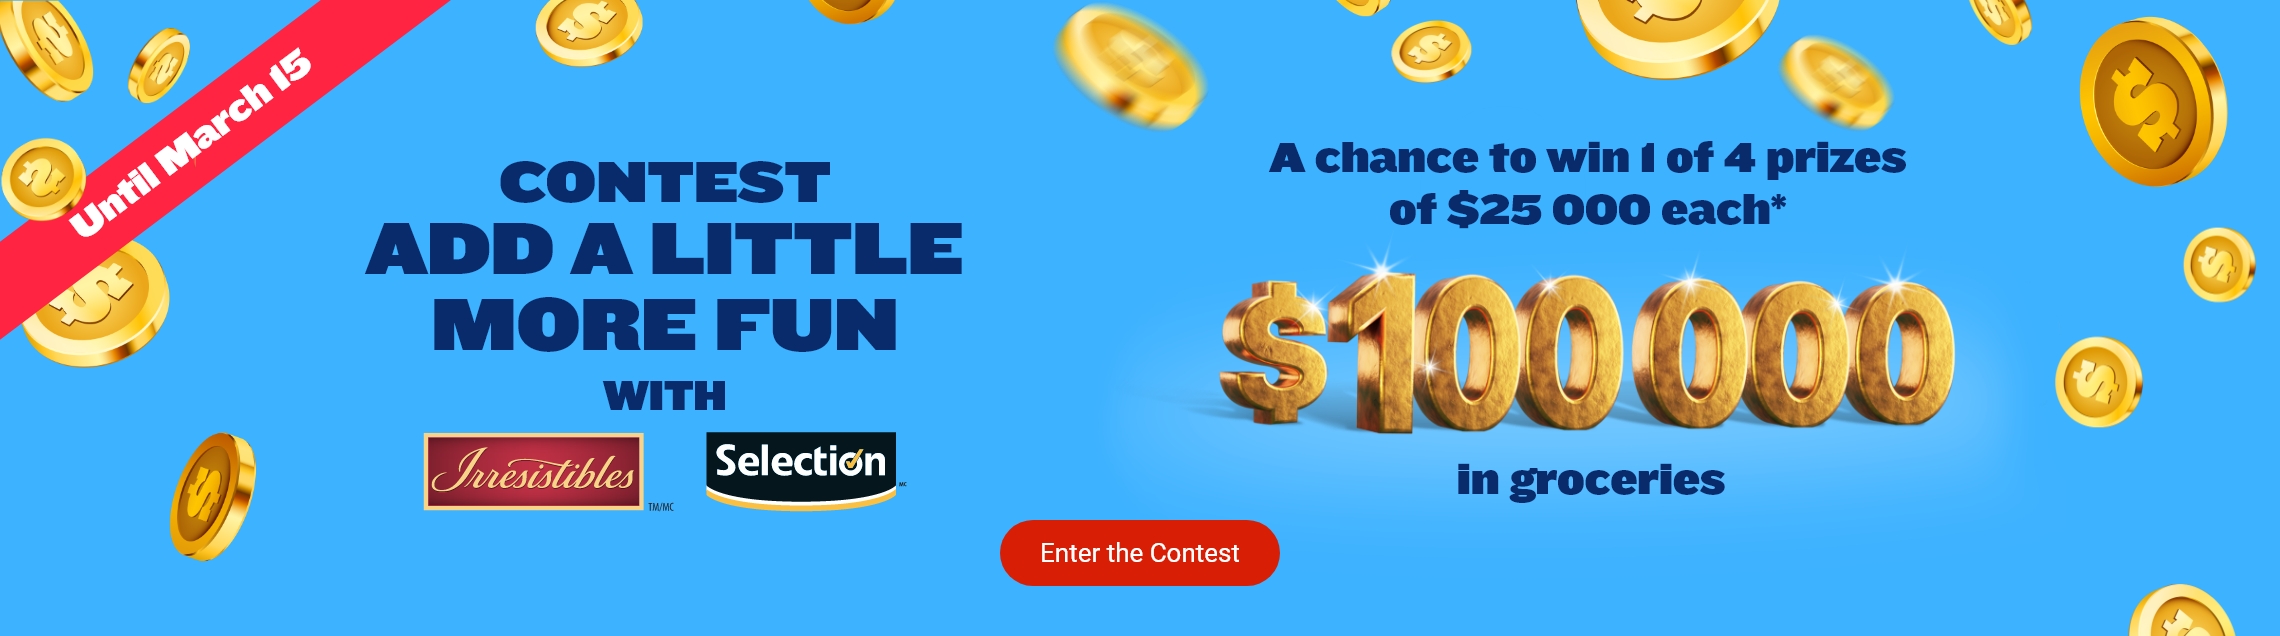 Until March 15 - contest - ADD A LITTLE more fun with Irresistibles and Selection logo - A chance to win 1 of 4 prizes of $25 000 each* $100 000 in groceries